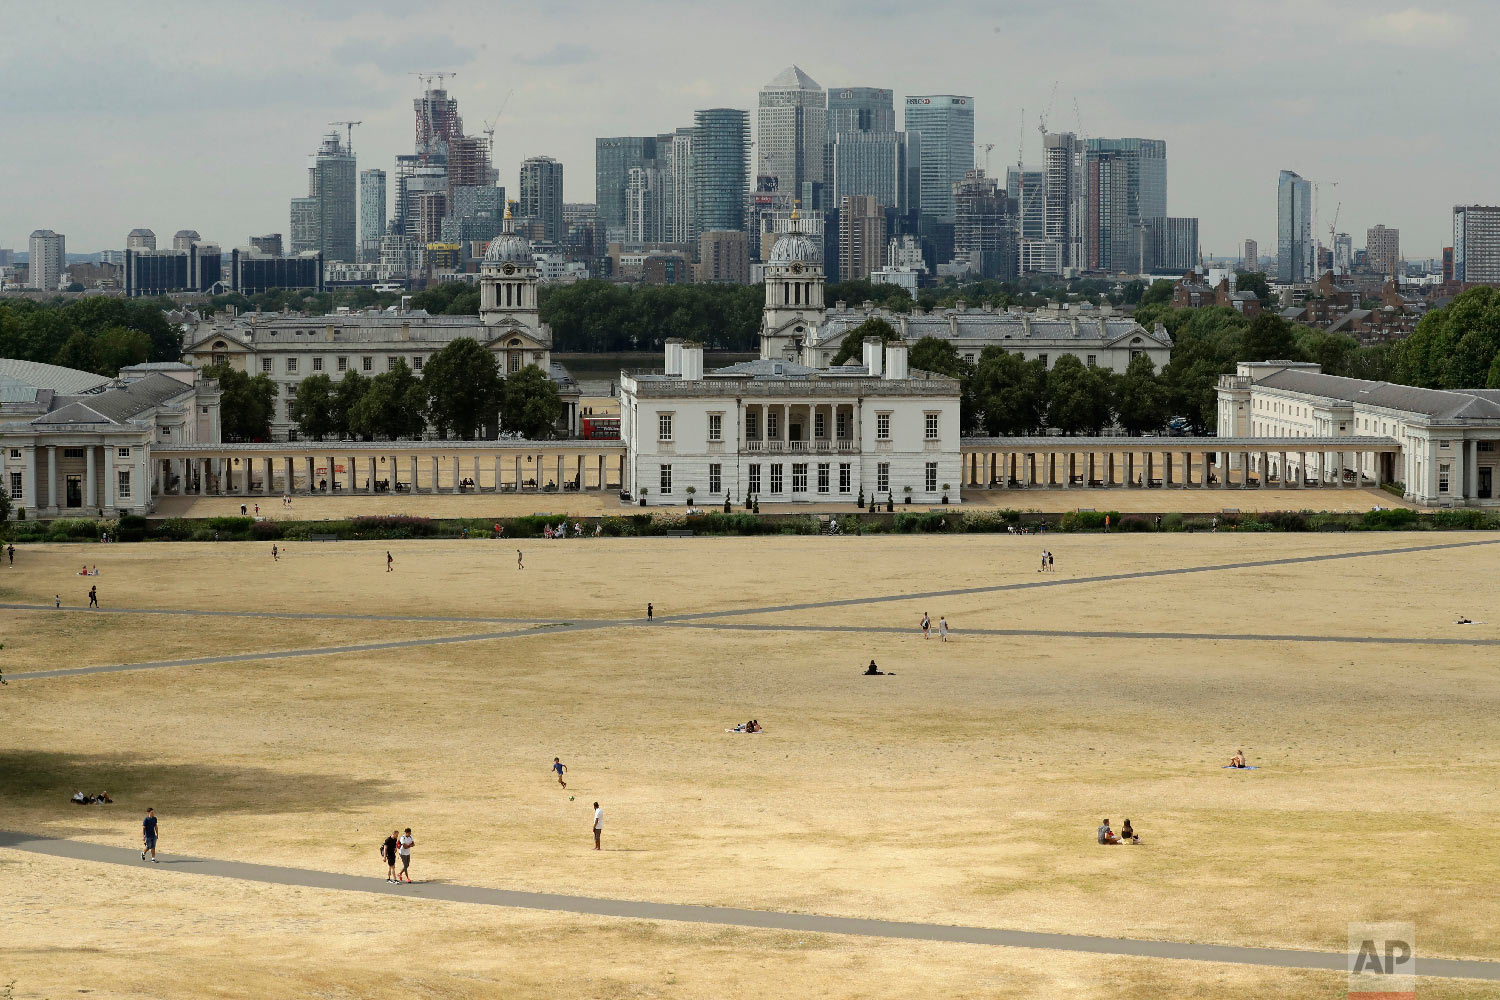  A view shows parched grass from the lack of rain in Greenwich Park, backdropped by the Royal Museums Greenwich and the skyscrapers of the Canary Wharf business district, during what has been the driest summer for many years in London on July 24, 201